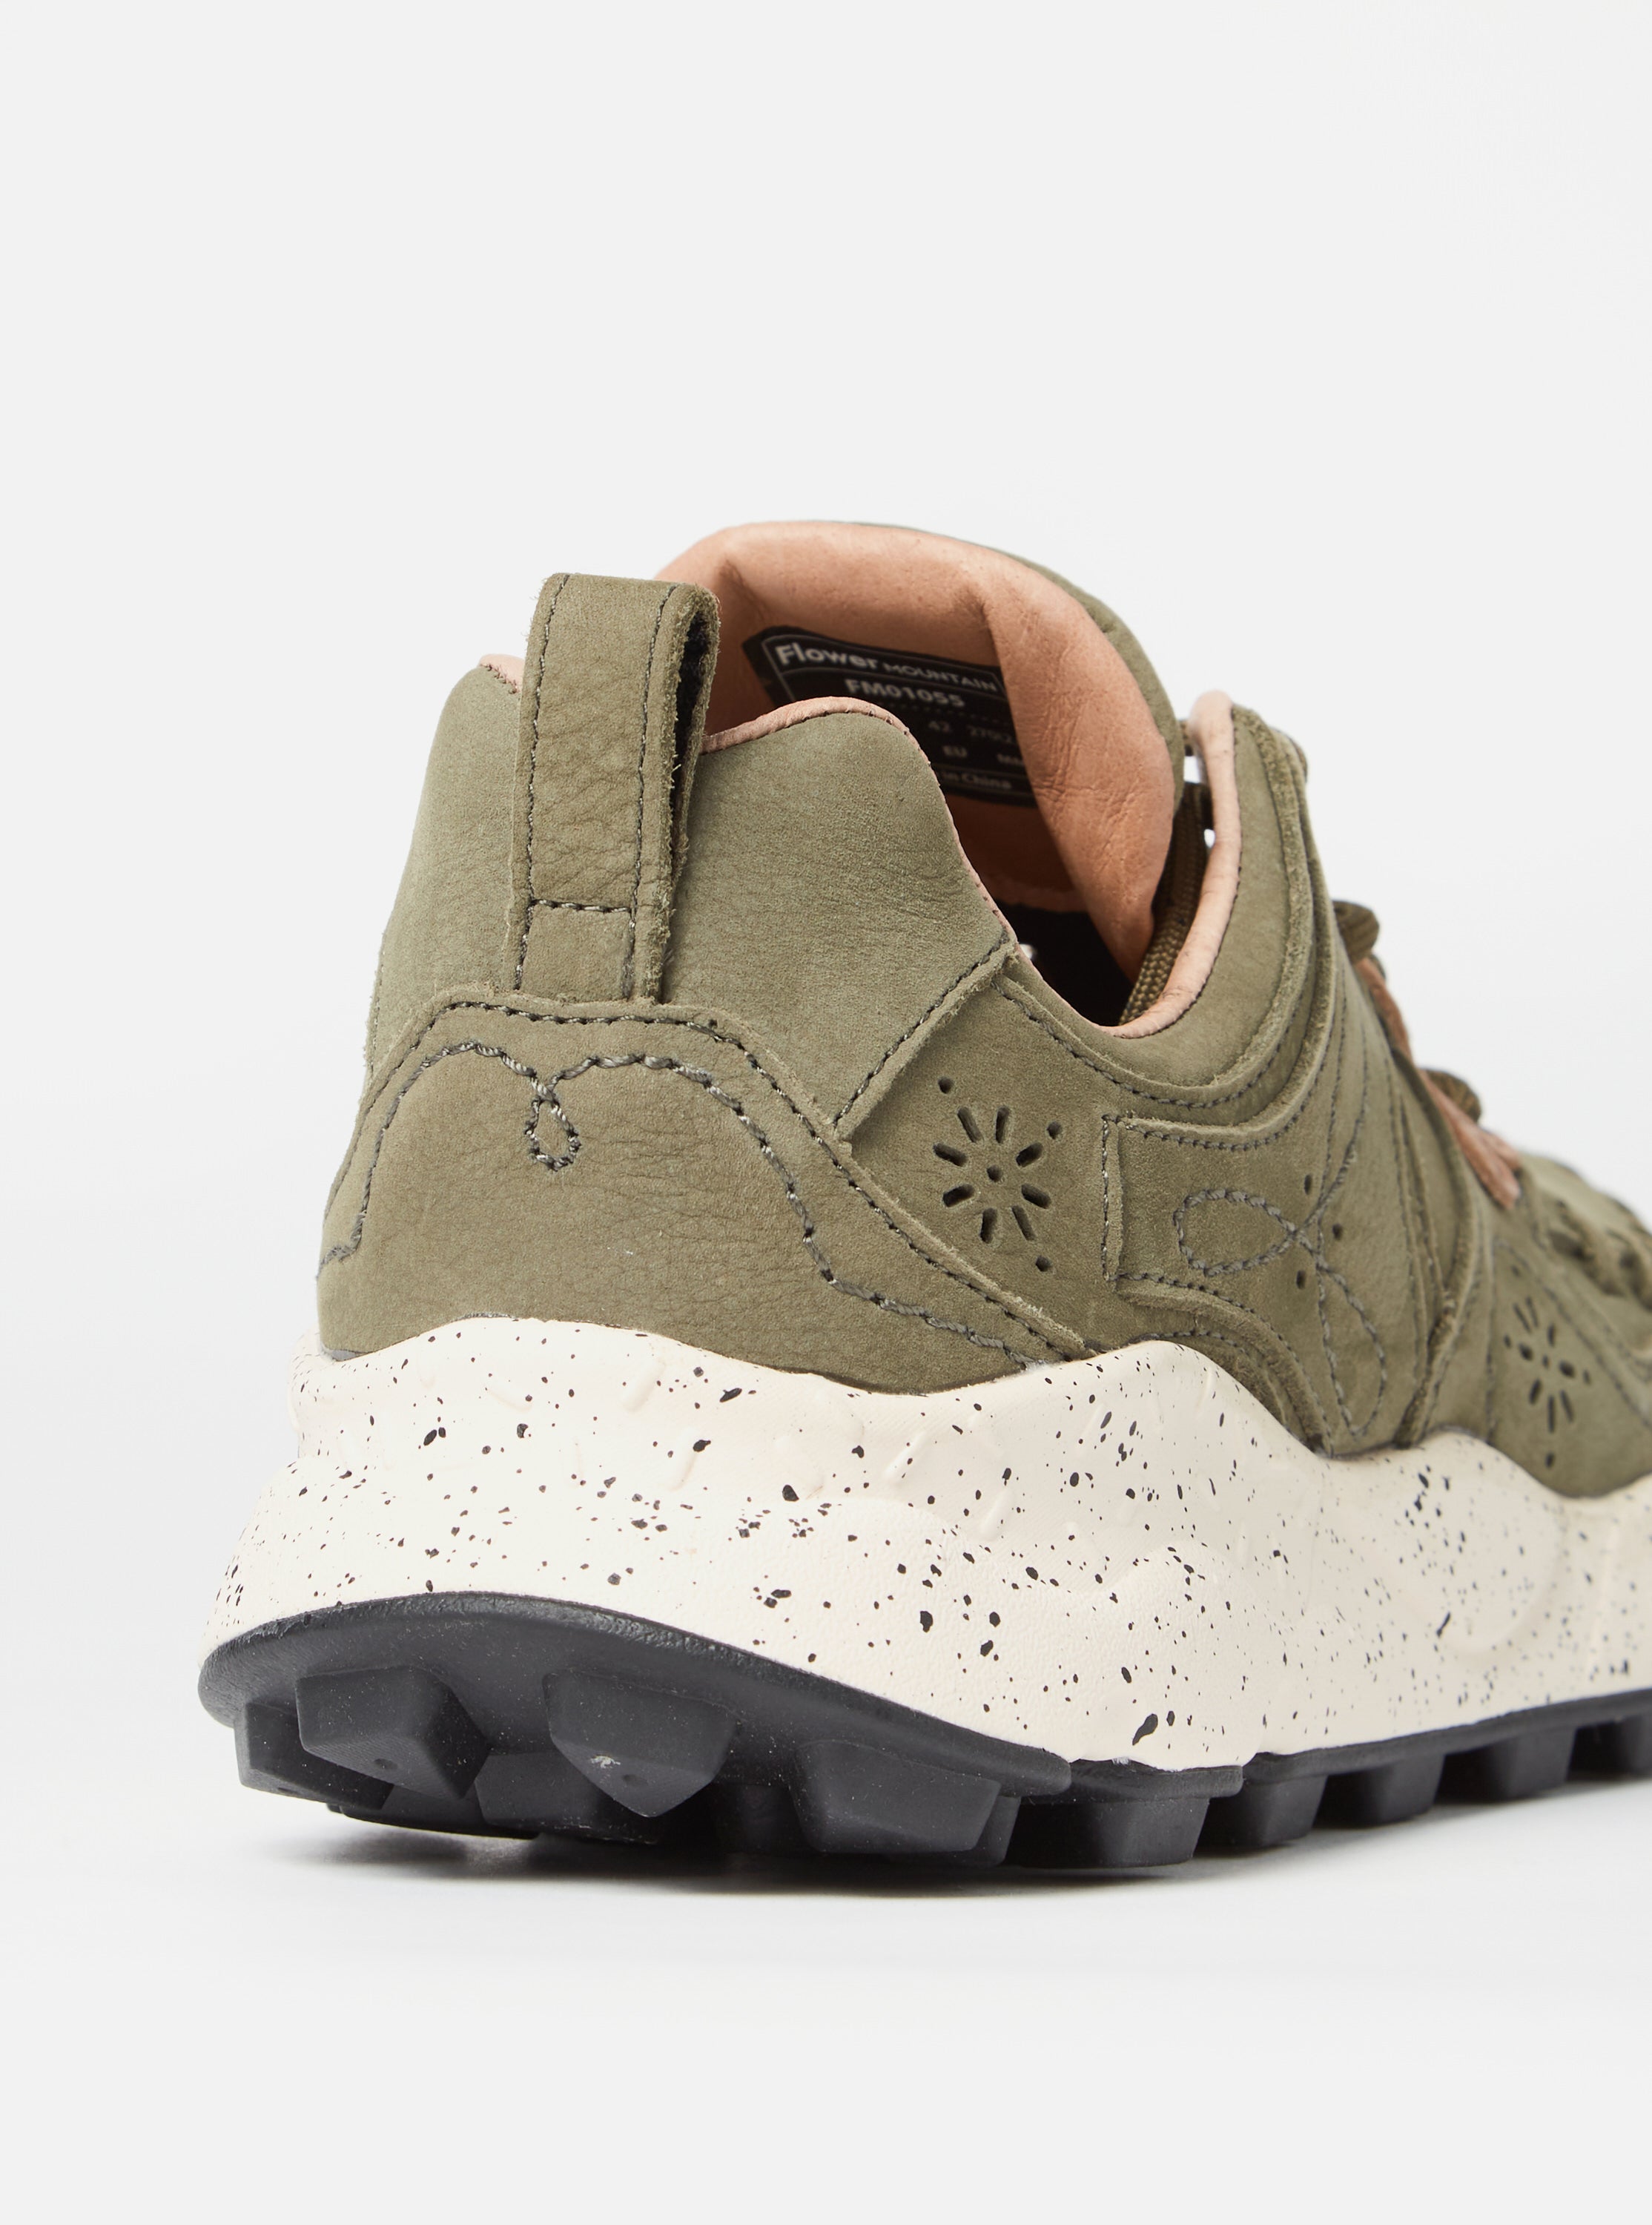 Flower Mountain Yamano Man In Military Olive Nubuck Leather